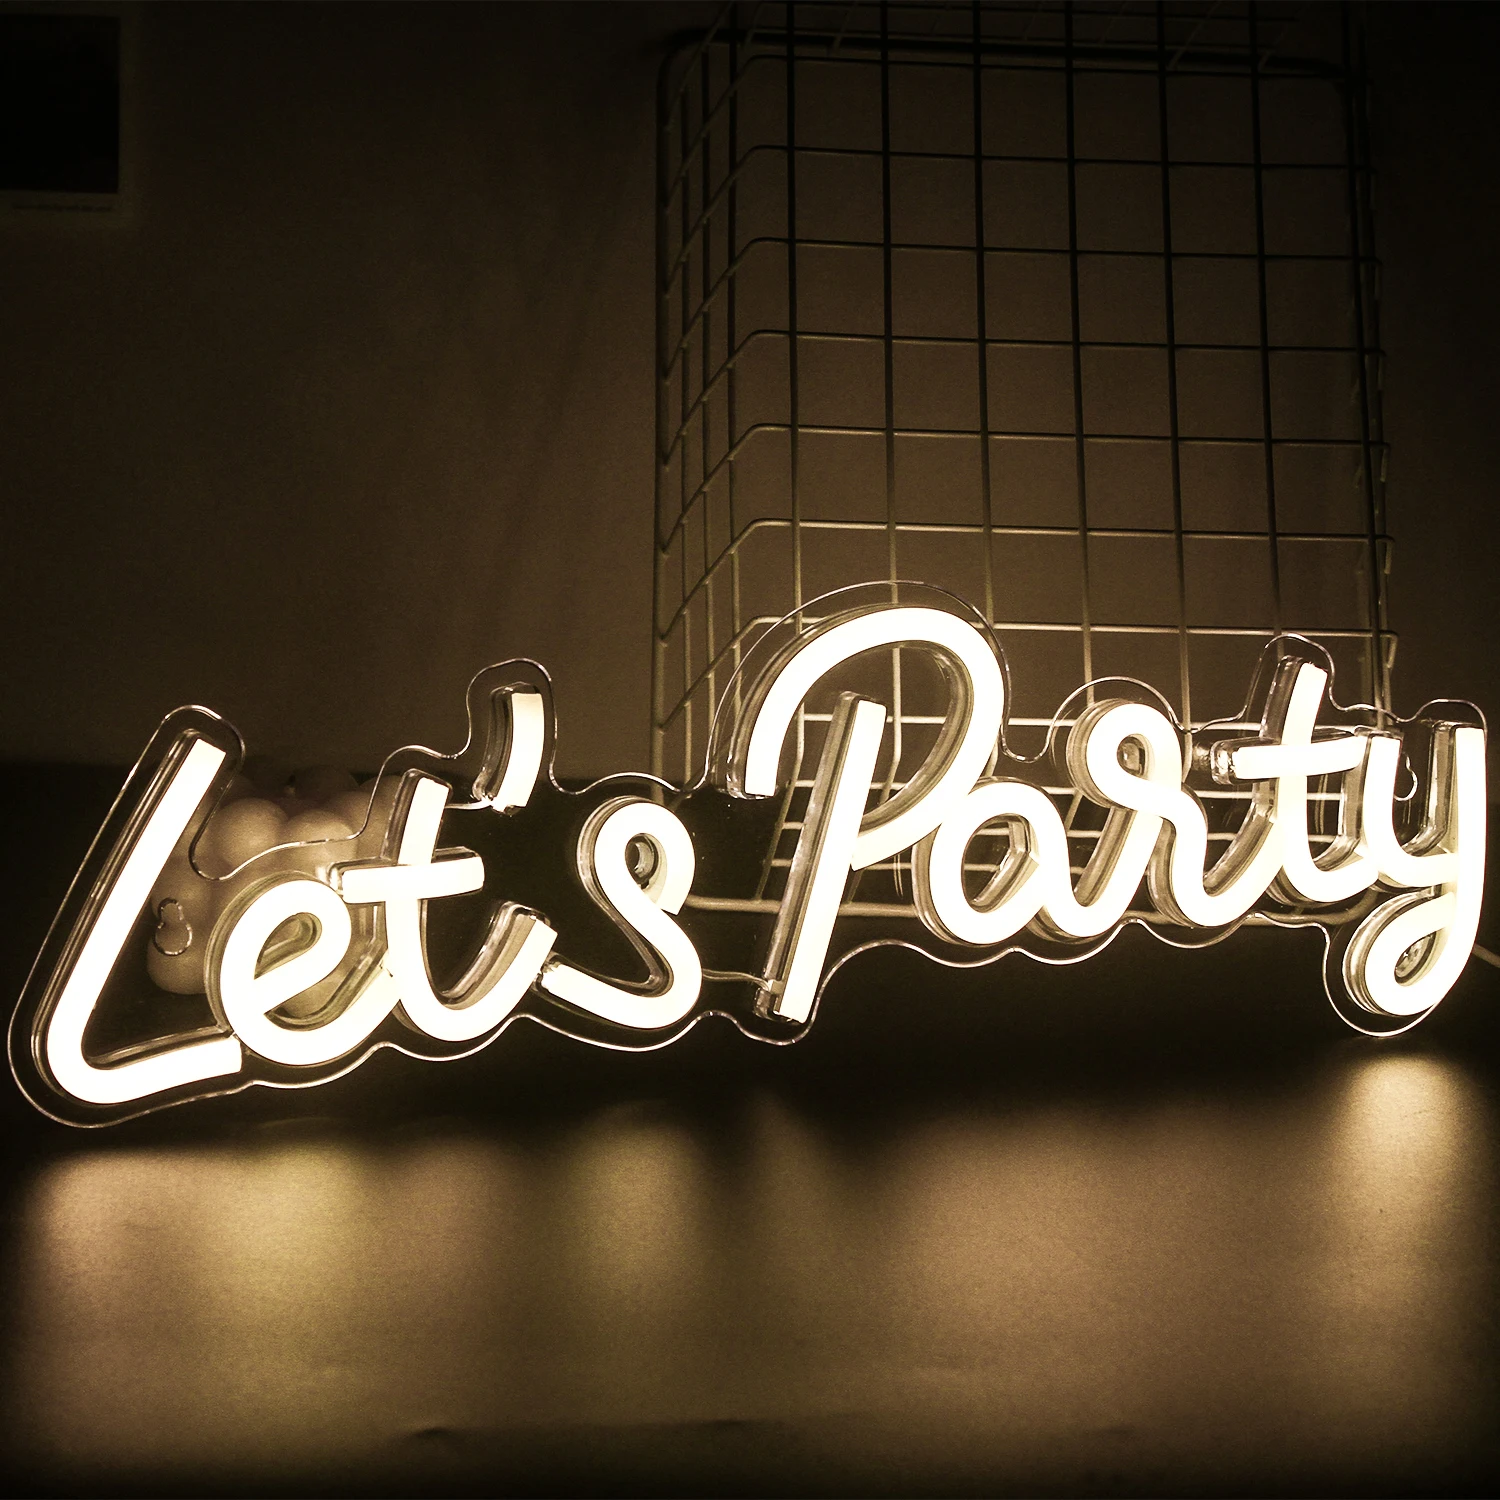 

Let's Party Neon Signs Warm White Led Neon Light for Wall Decor for Birthday Wedding Valentines Day Bar Party LED Neon USB